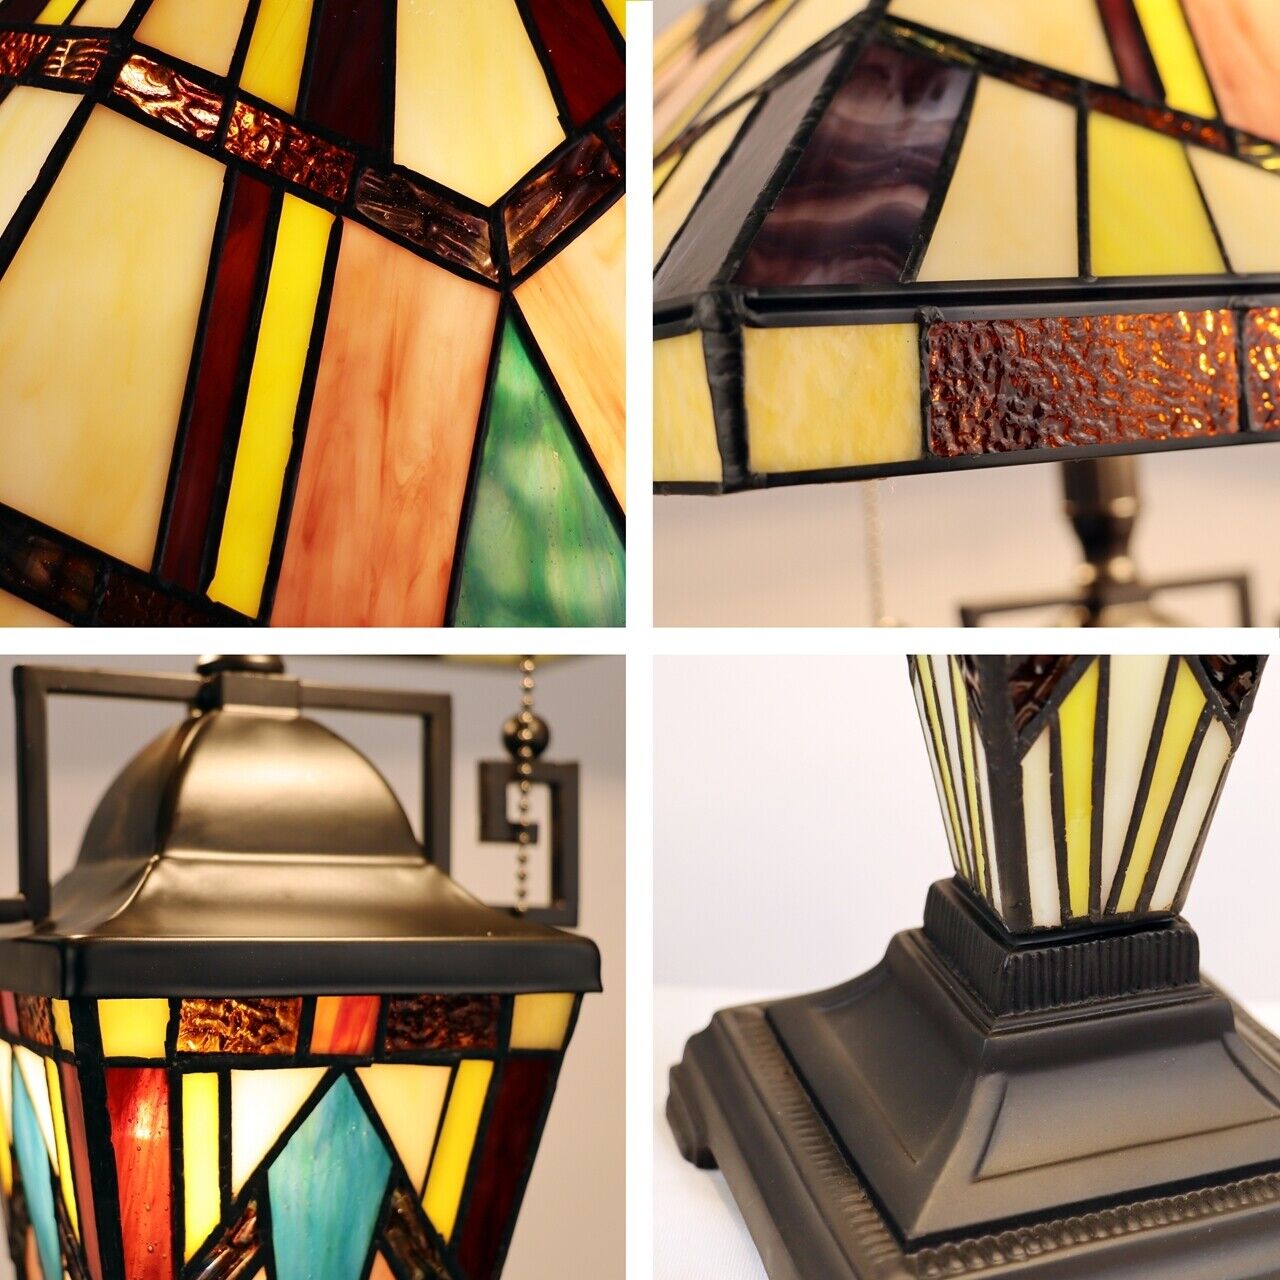 24" 3 light Antique Vintage Style Stained Glass Mission Table Lamp